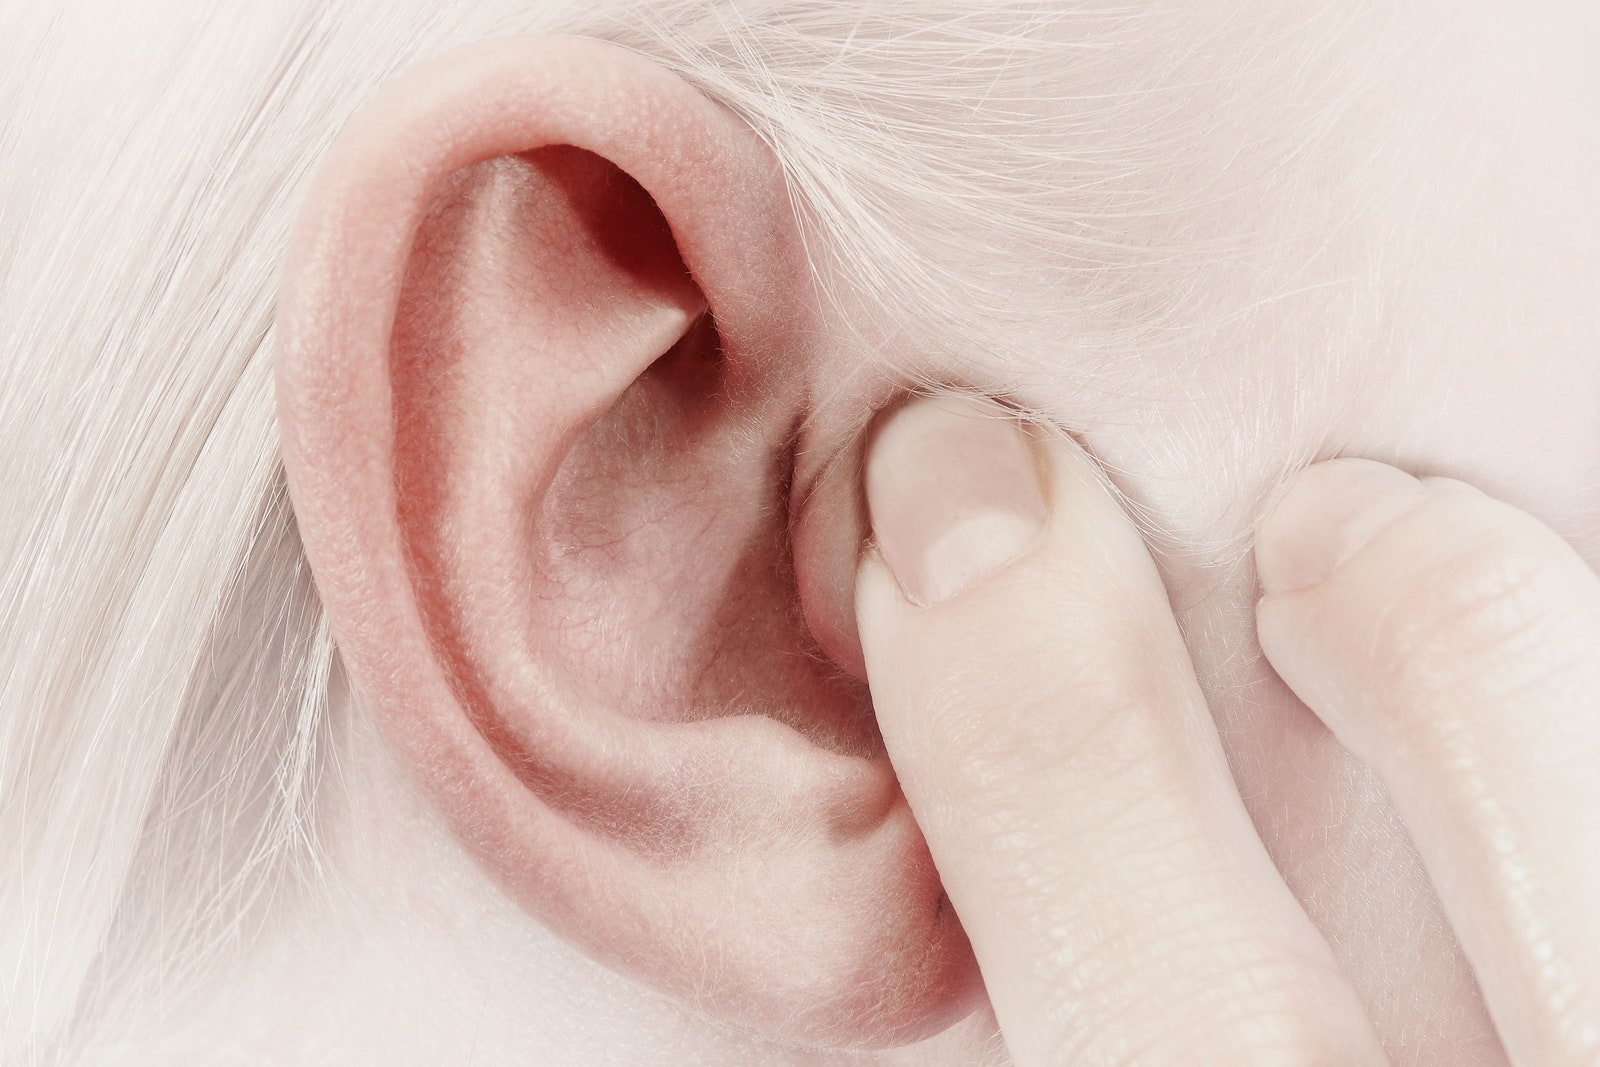 New Trials Aim to Restore Hearing in Deaf Children&-With Gene Therapy